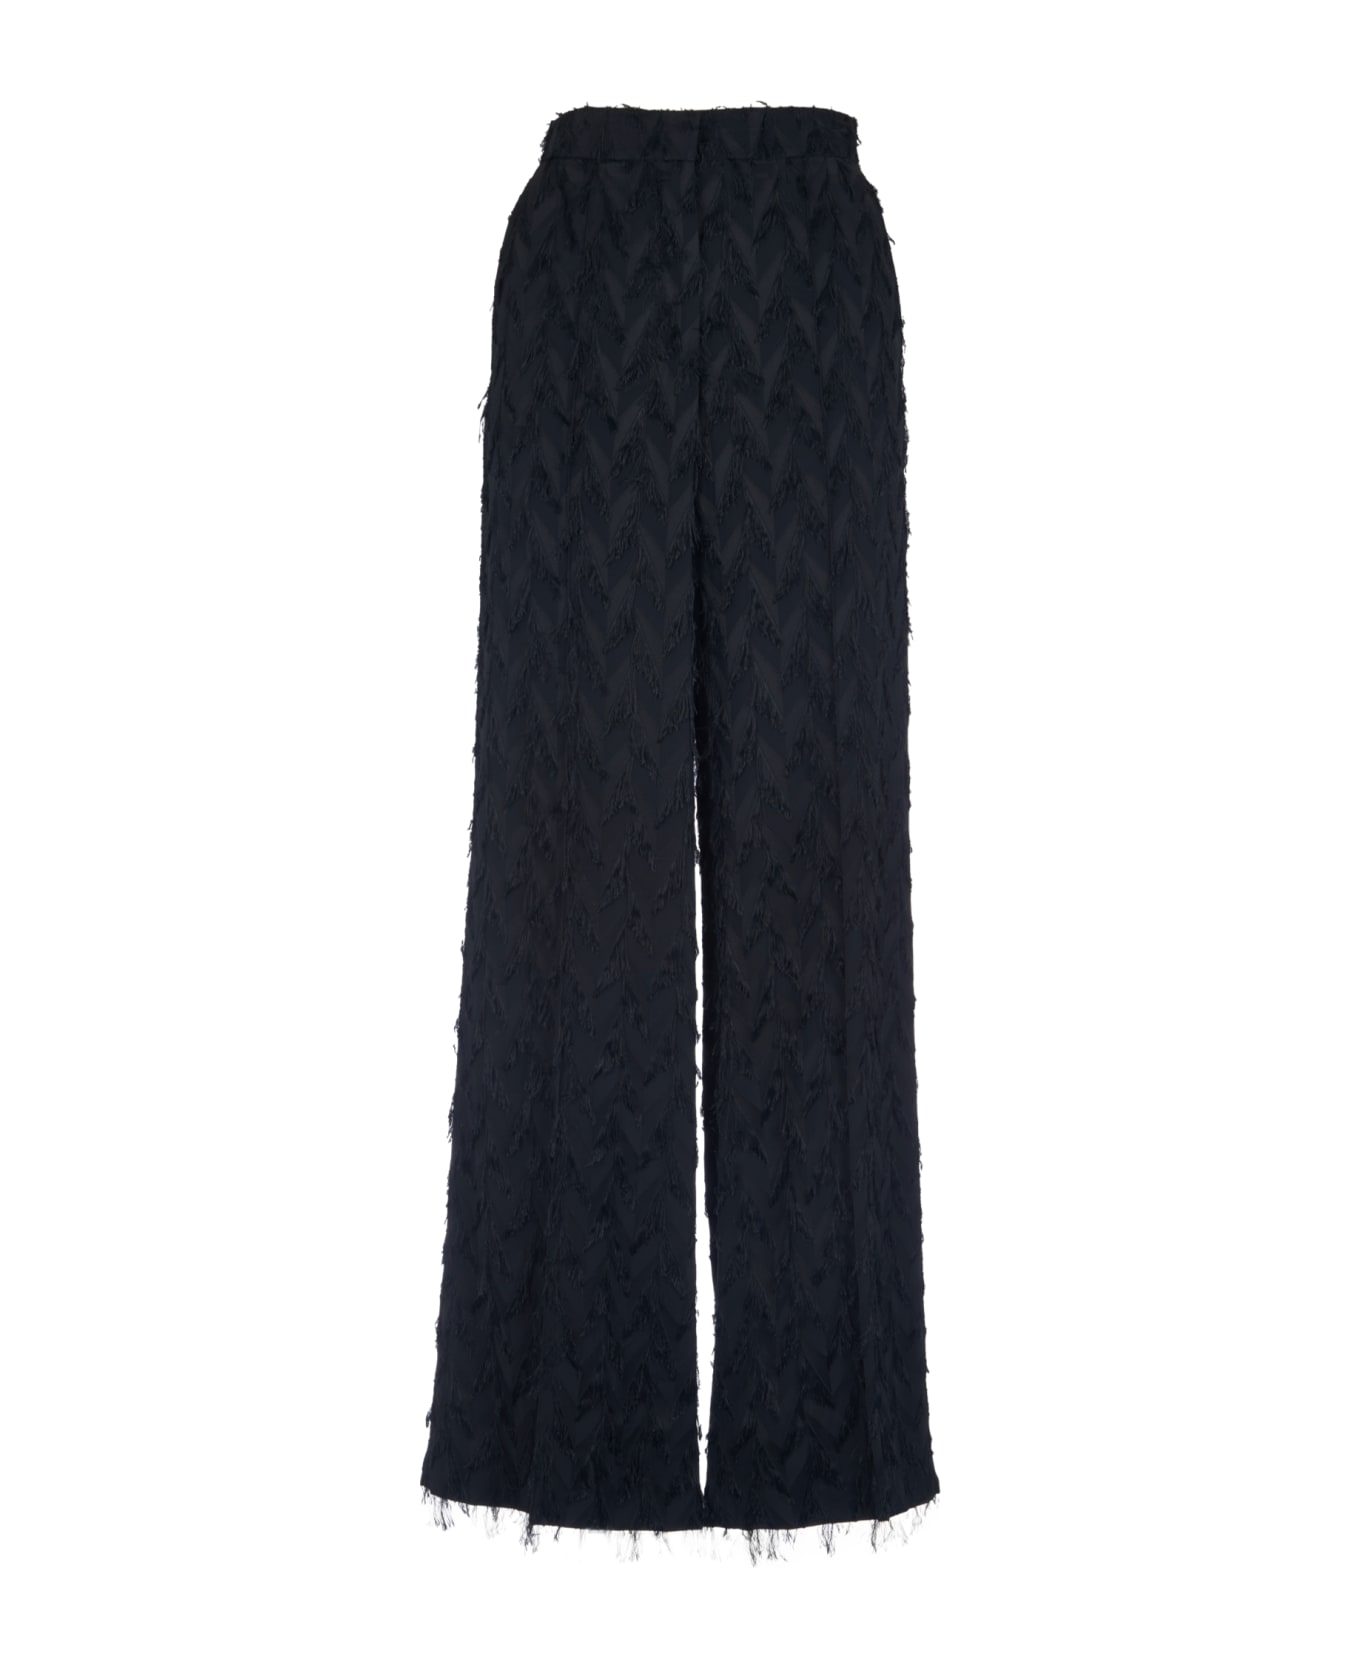 MSGM Concealed Fringed Trousers - Nero